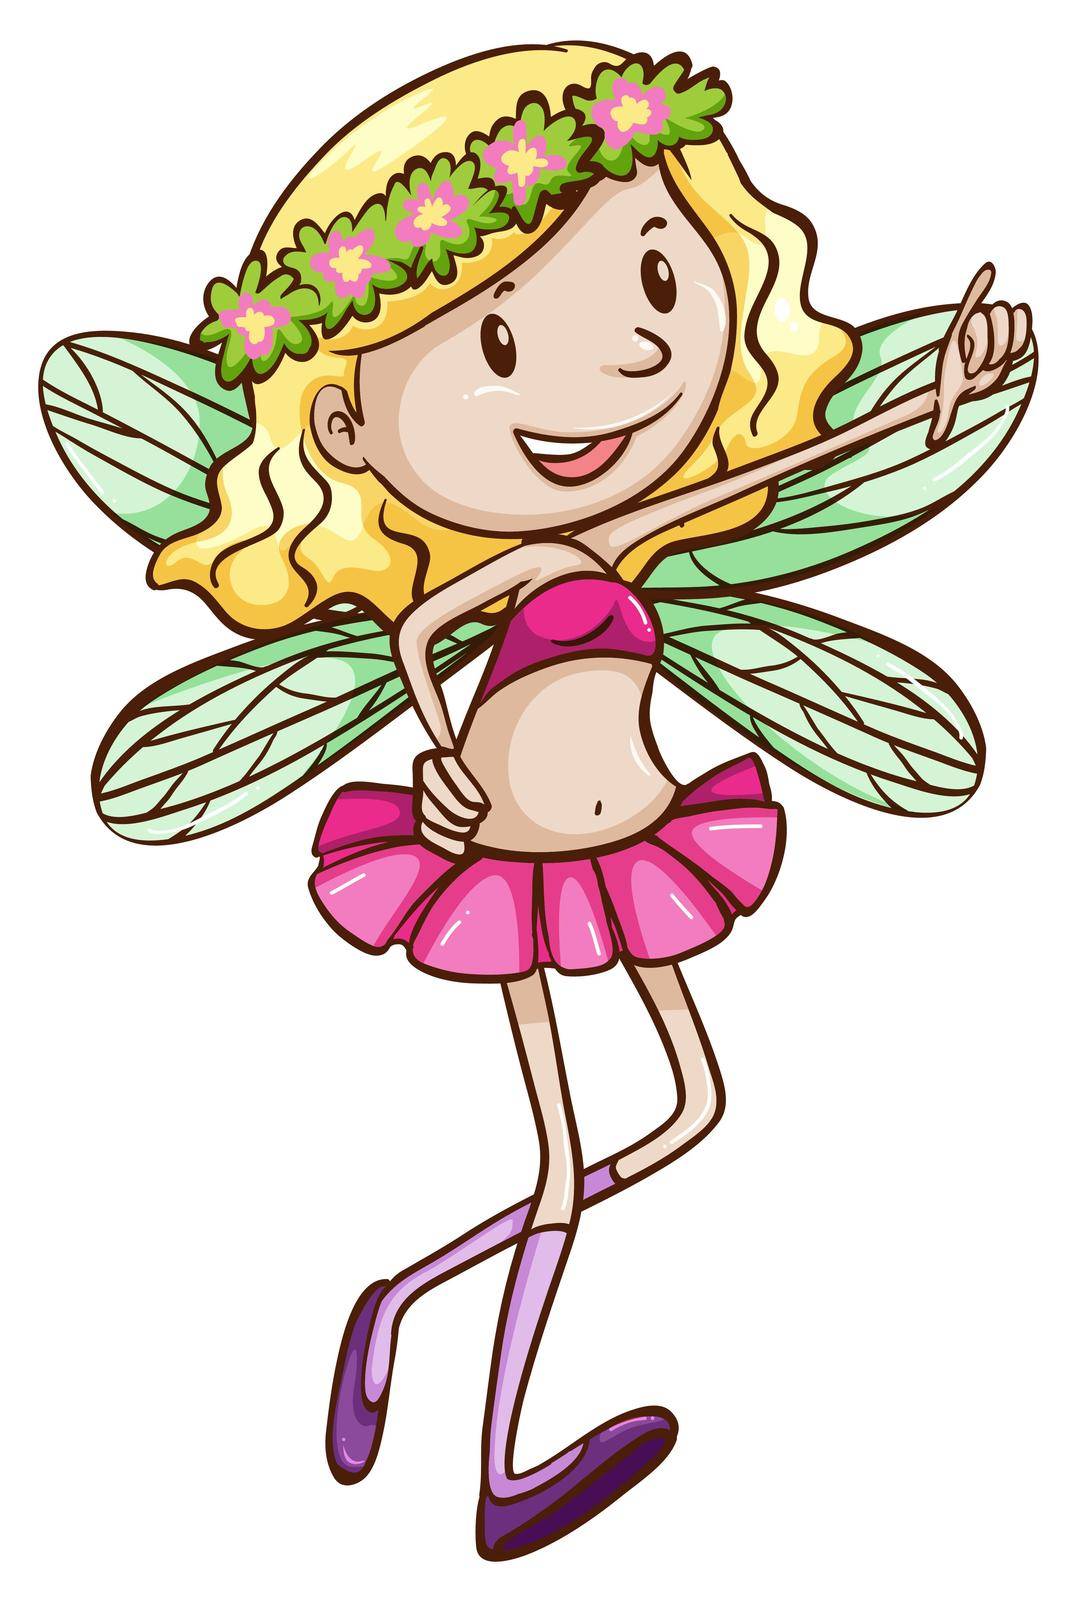 A cute fairy on a white background